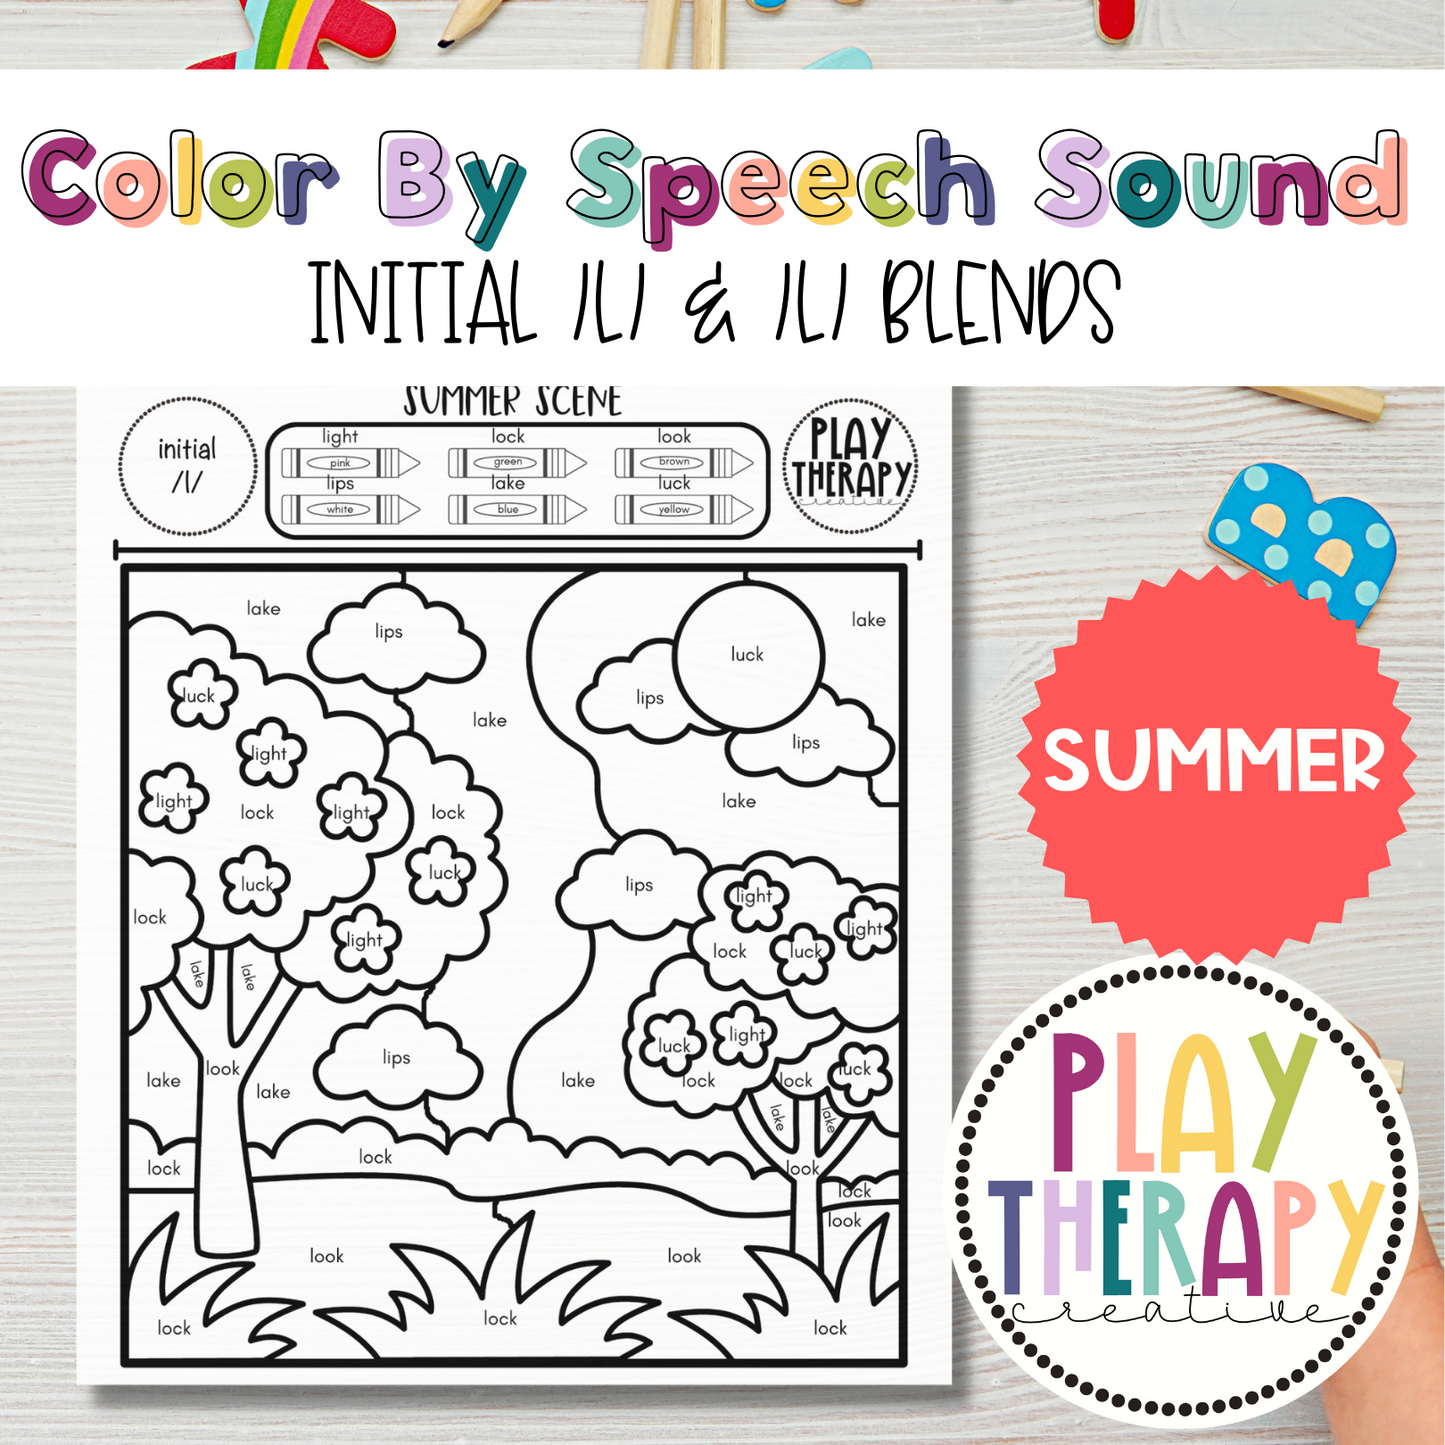 /l/ Sound Summer Themed Color-by-Speech-Sounds for Speech Therapy